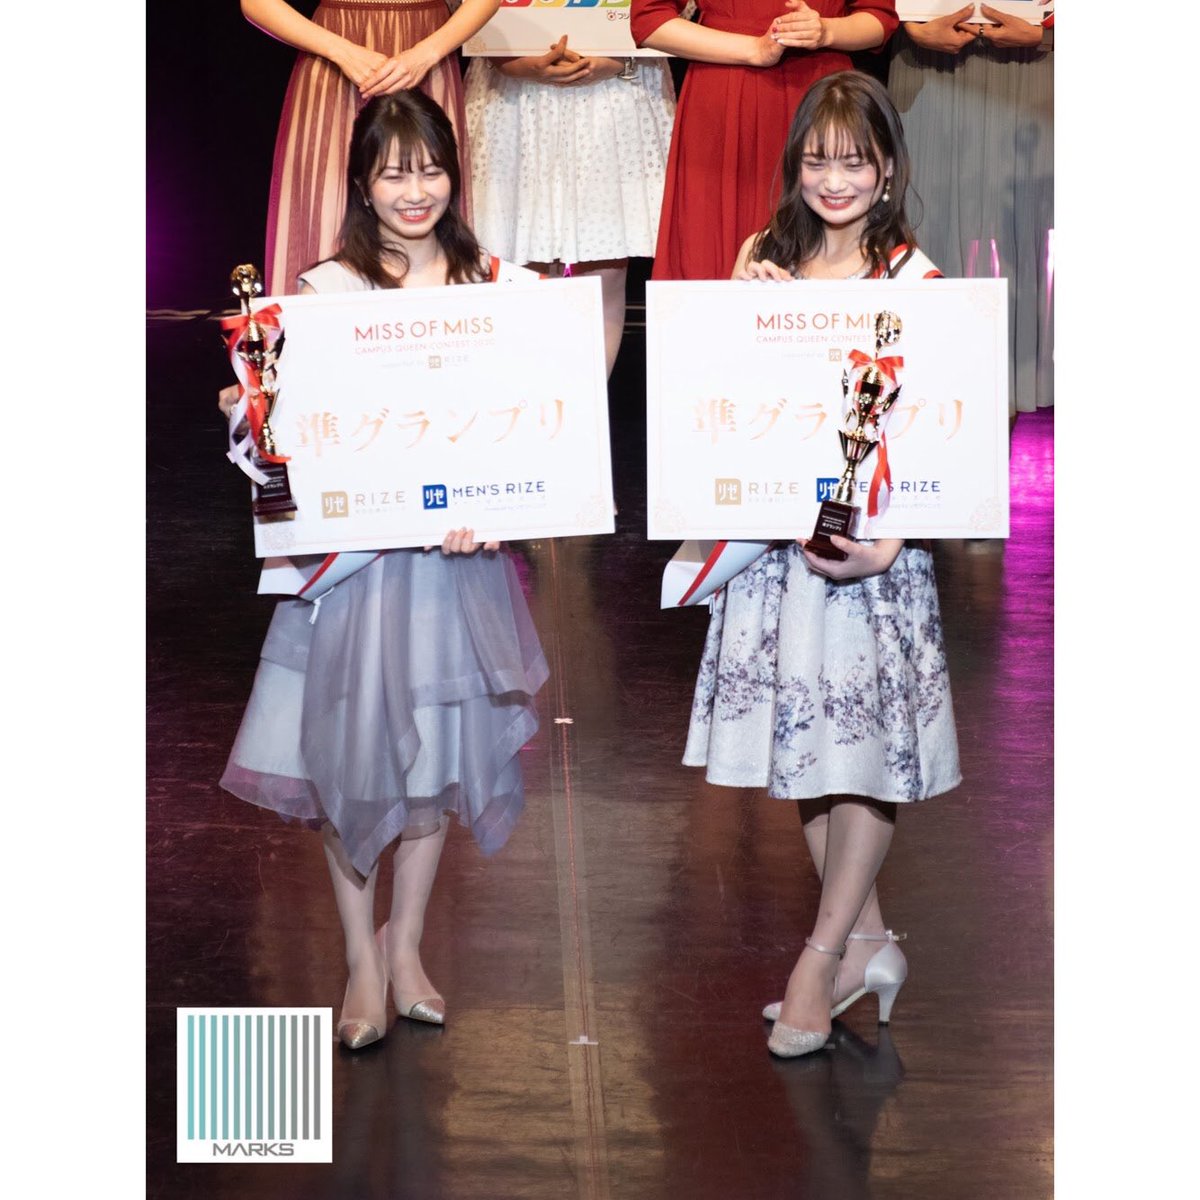 MISS OF MISS CAMPUS QUEEN CONTEST 2020 supported by リゼクリニック 受賞者

『準グランプリ』
⭐️ 松本 楓加さん
成蹊大学　経済学部
⭐️ 森下 花音さん
千葉大学　教育学部
おめでとうございます！
#ミスオブミス 
#学生団体MARKS 
#MOM2020